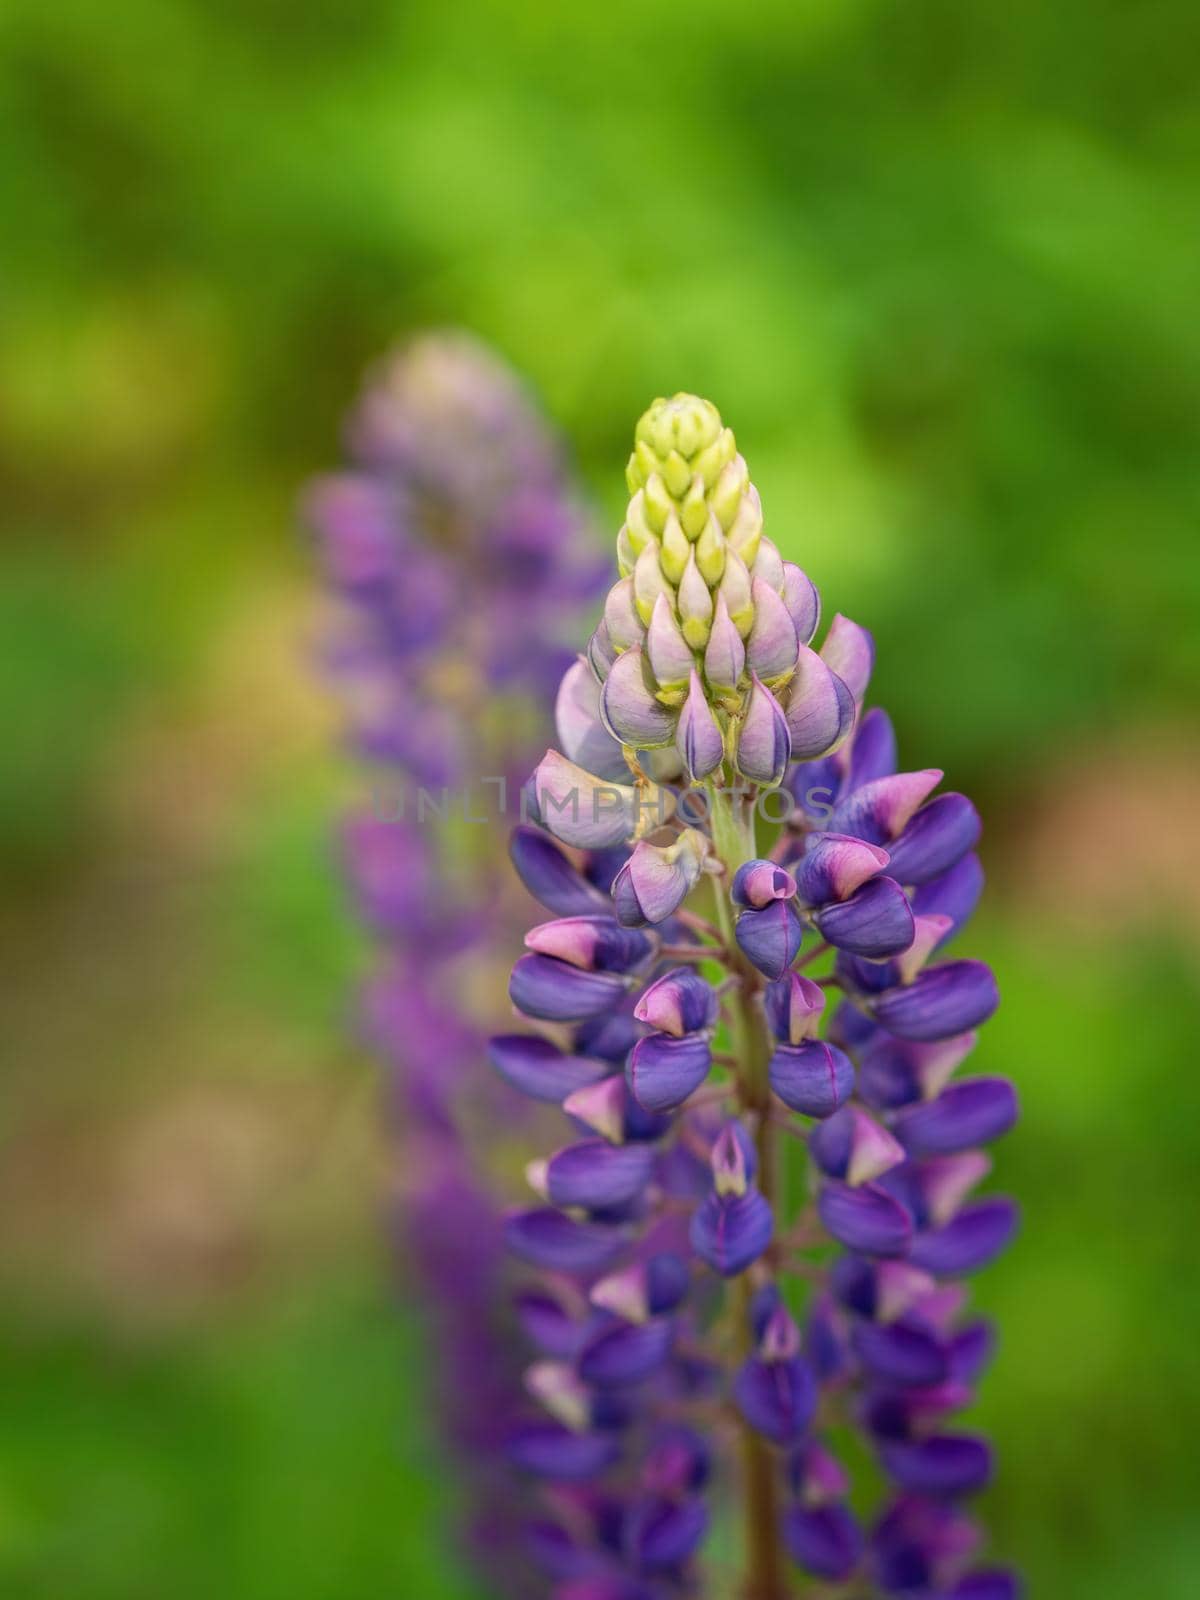 Colorful blue and purple colorful vibrant lupine wildflowers in with bokeh blurred background by Andre1ns